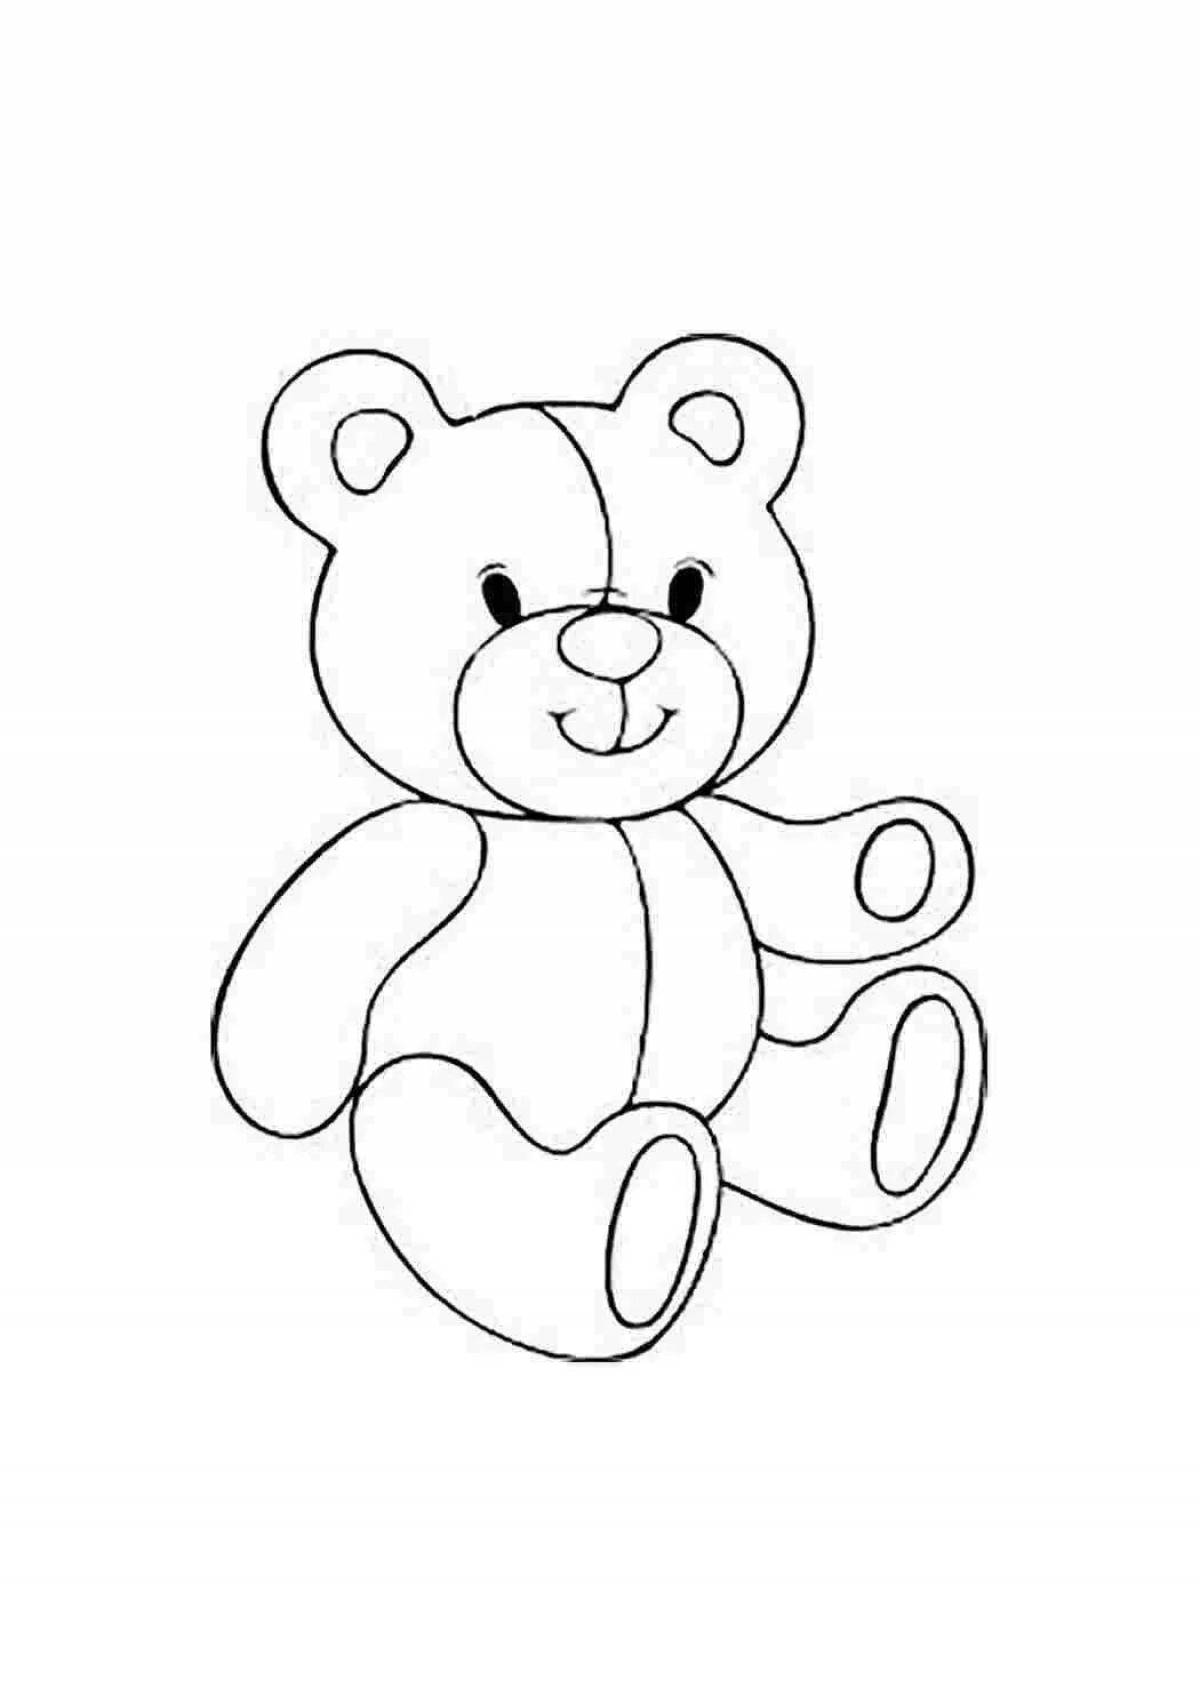 Coloring book with a sparkling bear cub